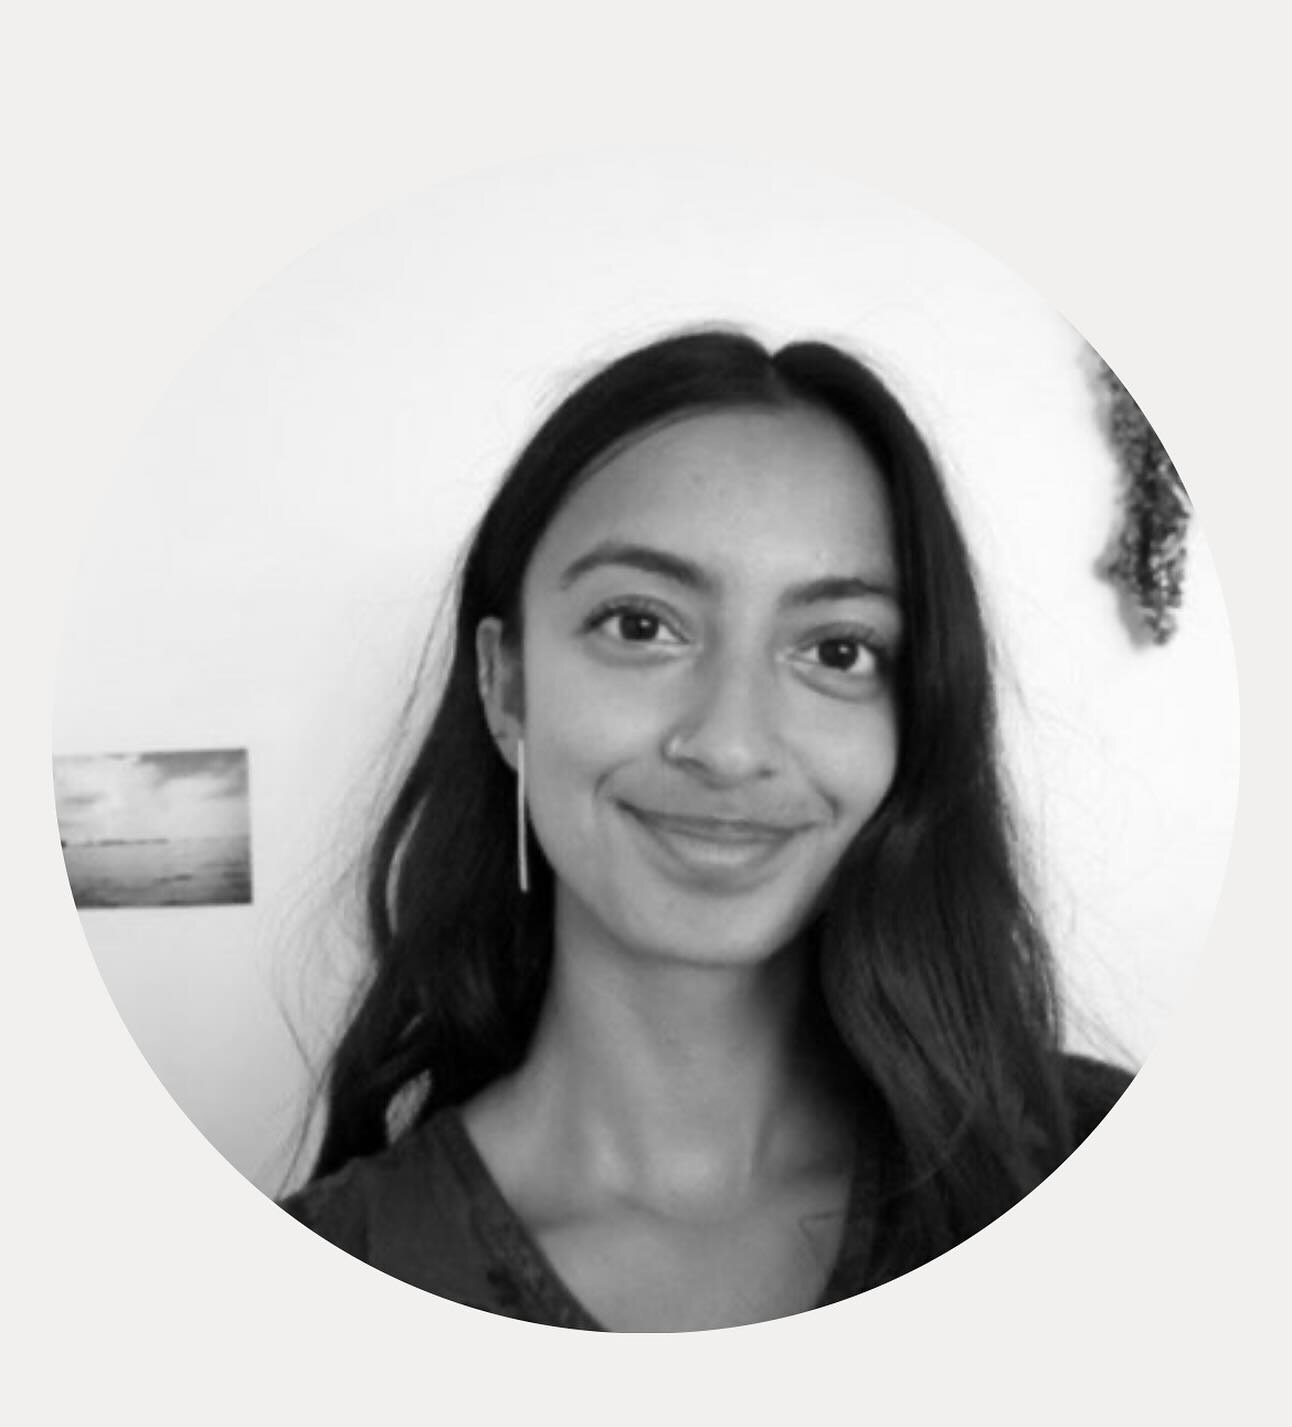 Another in our meet the new Loop Team Members. Today I am so thrilled to introduce Rupali, who is just the kindest, calming and thoughtful MT you could hope for. I love how she works and can&rsquo;t wait for more people to experience it and meet her.